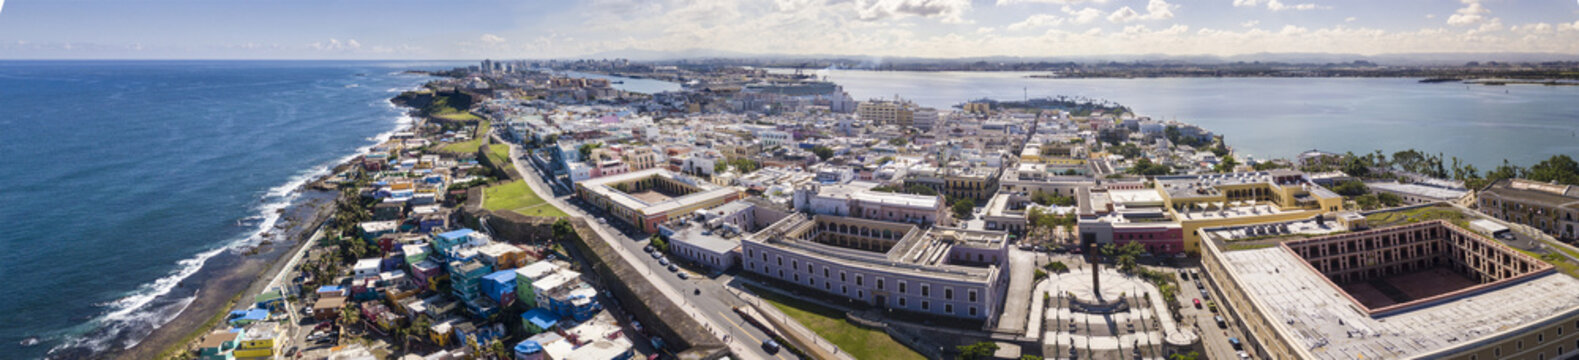 180 degree aerial panorama of Old San Juan, Puerto Rico with harbor in the background.